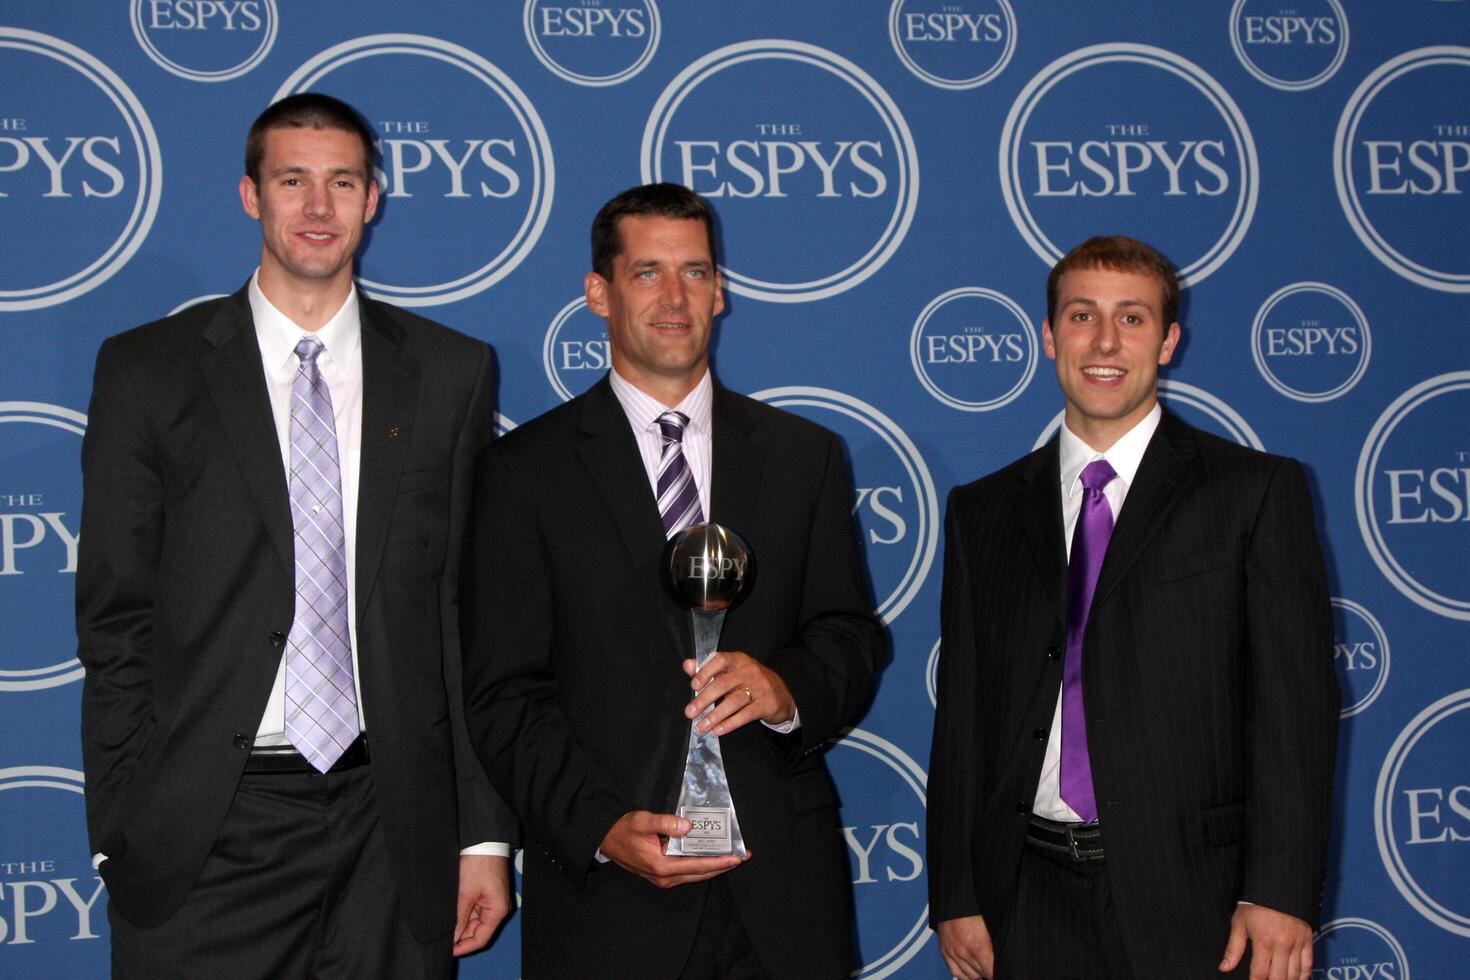 LOS ANGELES, JUL 14 - Ali Farokhmanesh, Ben Johnson and Adam Koch of the Northern Iowa men s basketball team in the Press Room of the 2010 ESPY Awards at Nokia Theater, LA Live on July14, 2010 in Los Angeles, CA photo